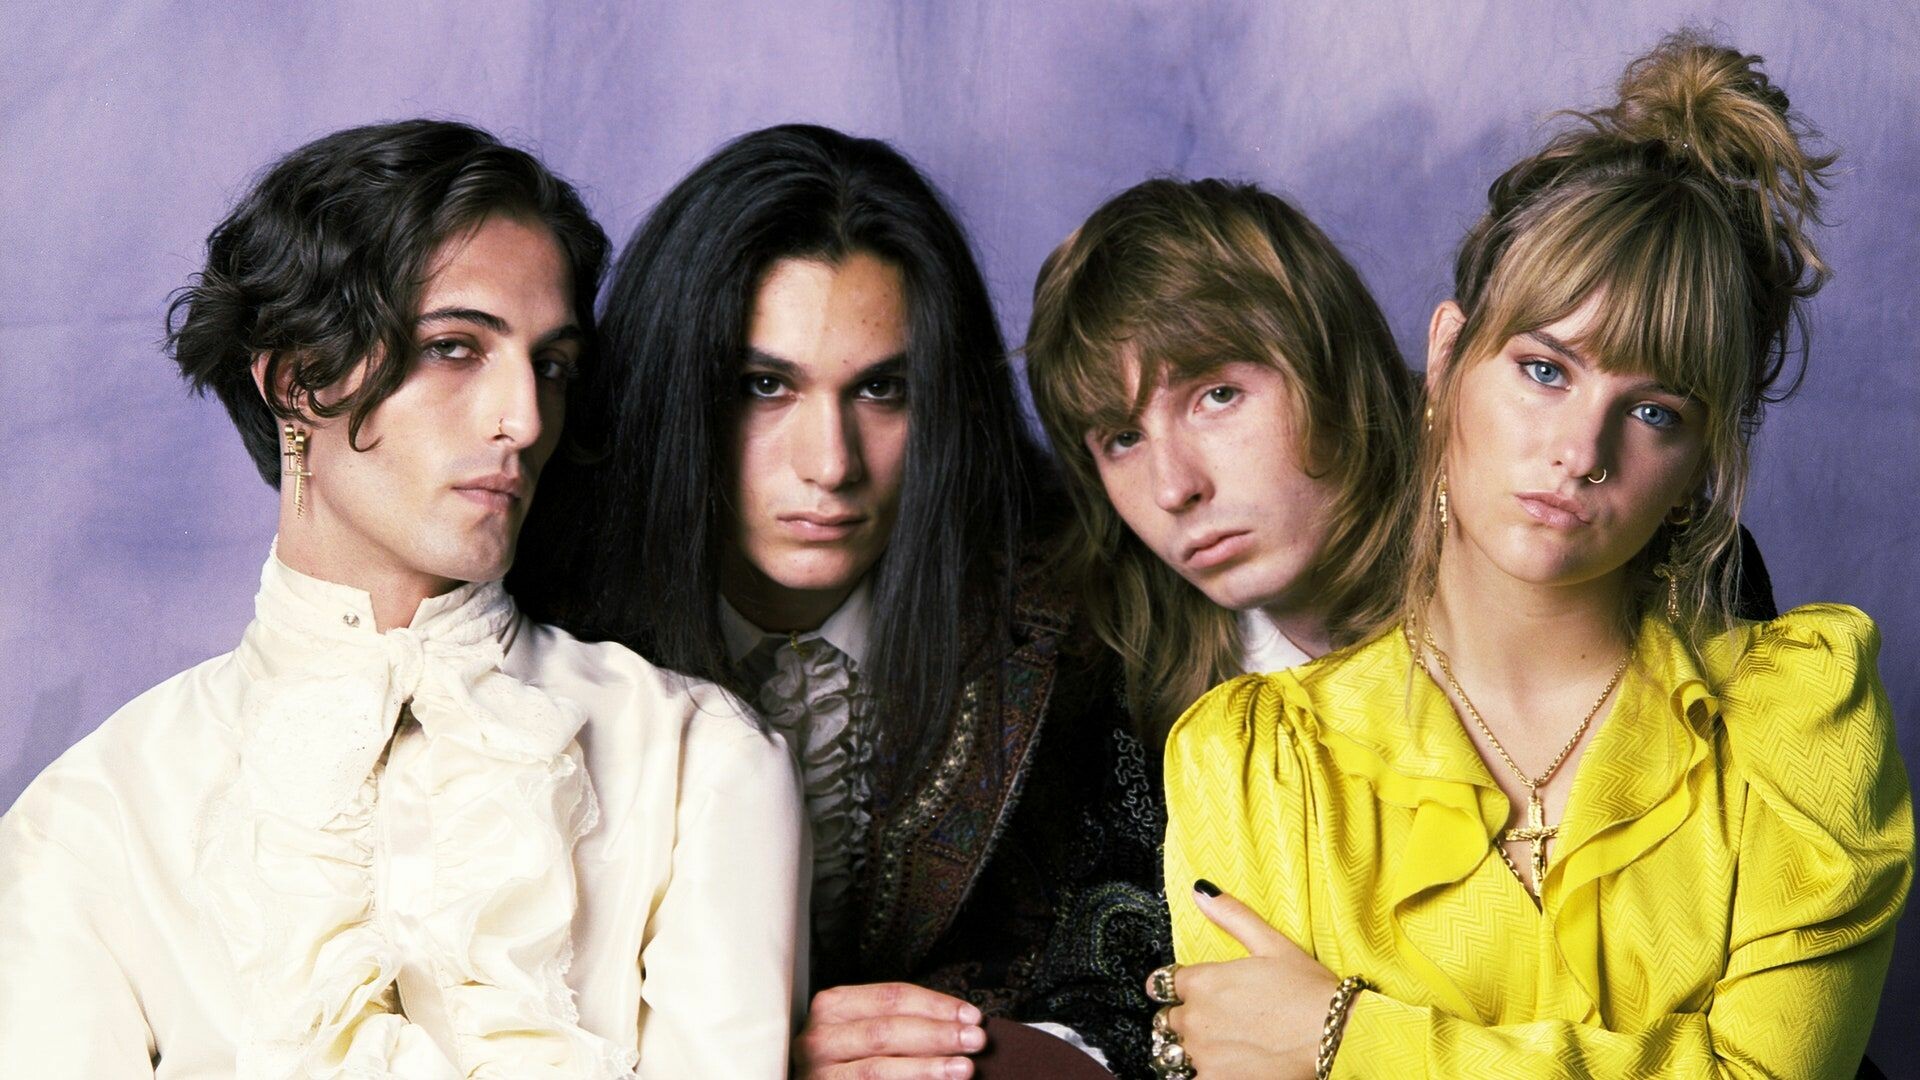 Maneskin: The band received their first Grammy nomination in the Best New Artist category at the 2023 Grammy Awards. 1920x1080 Full HD Wallpaper.